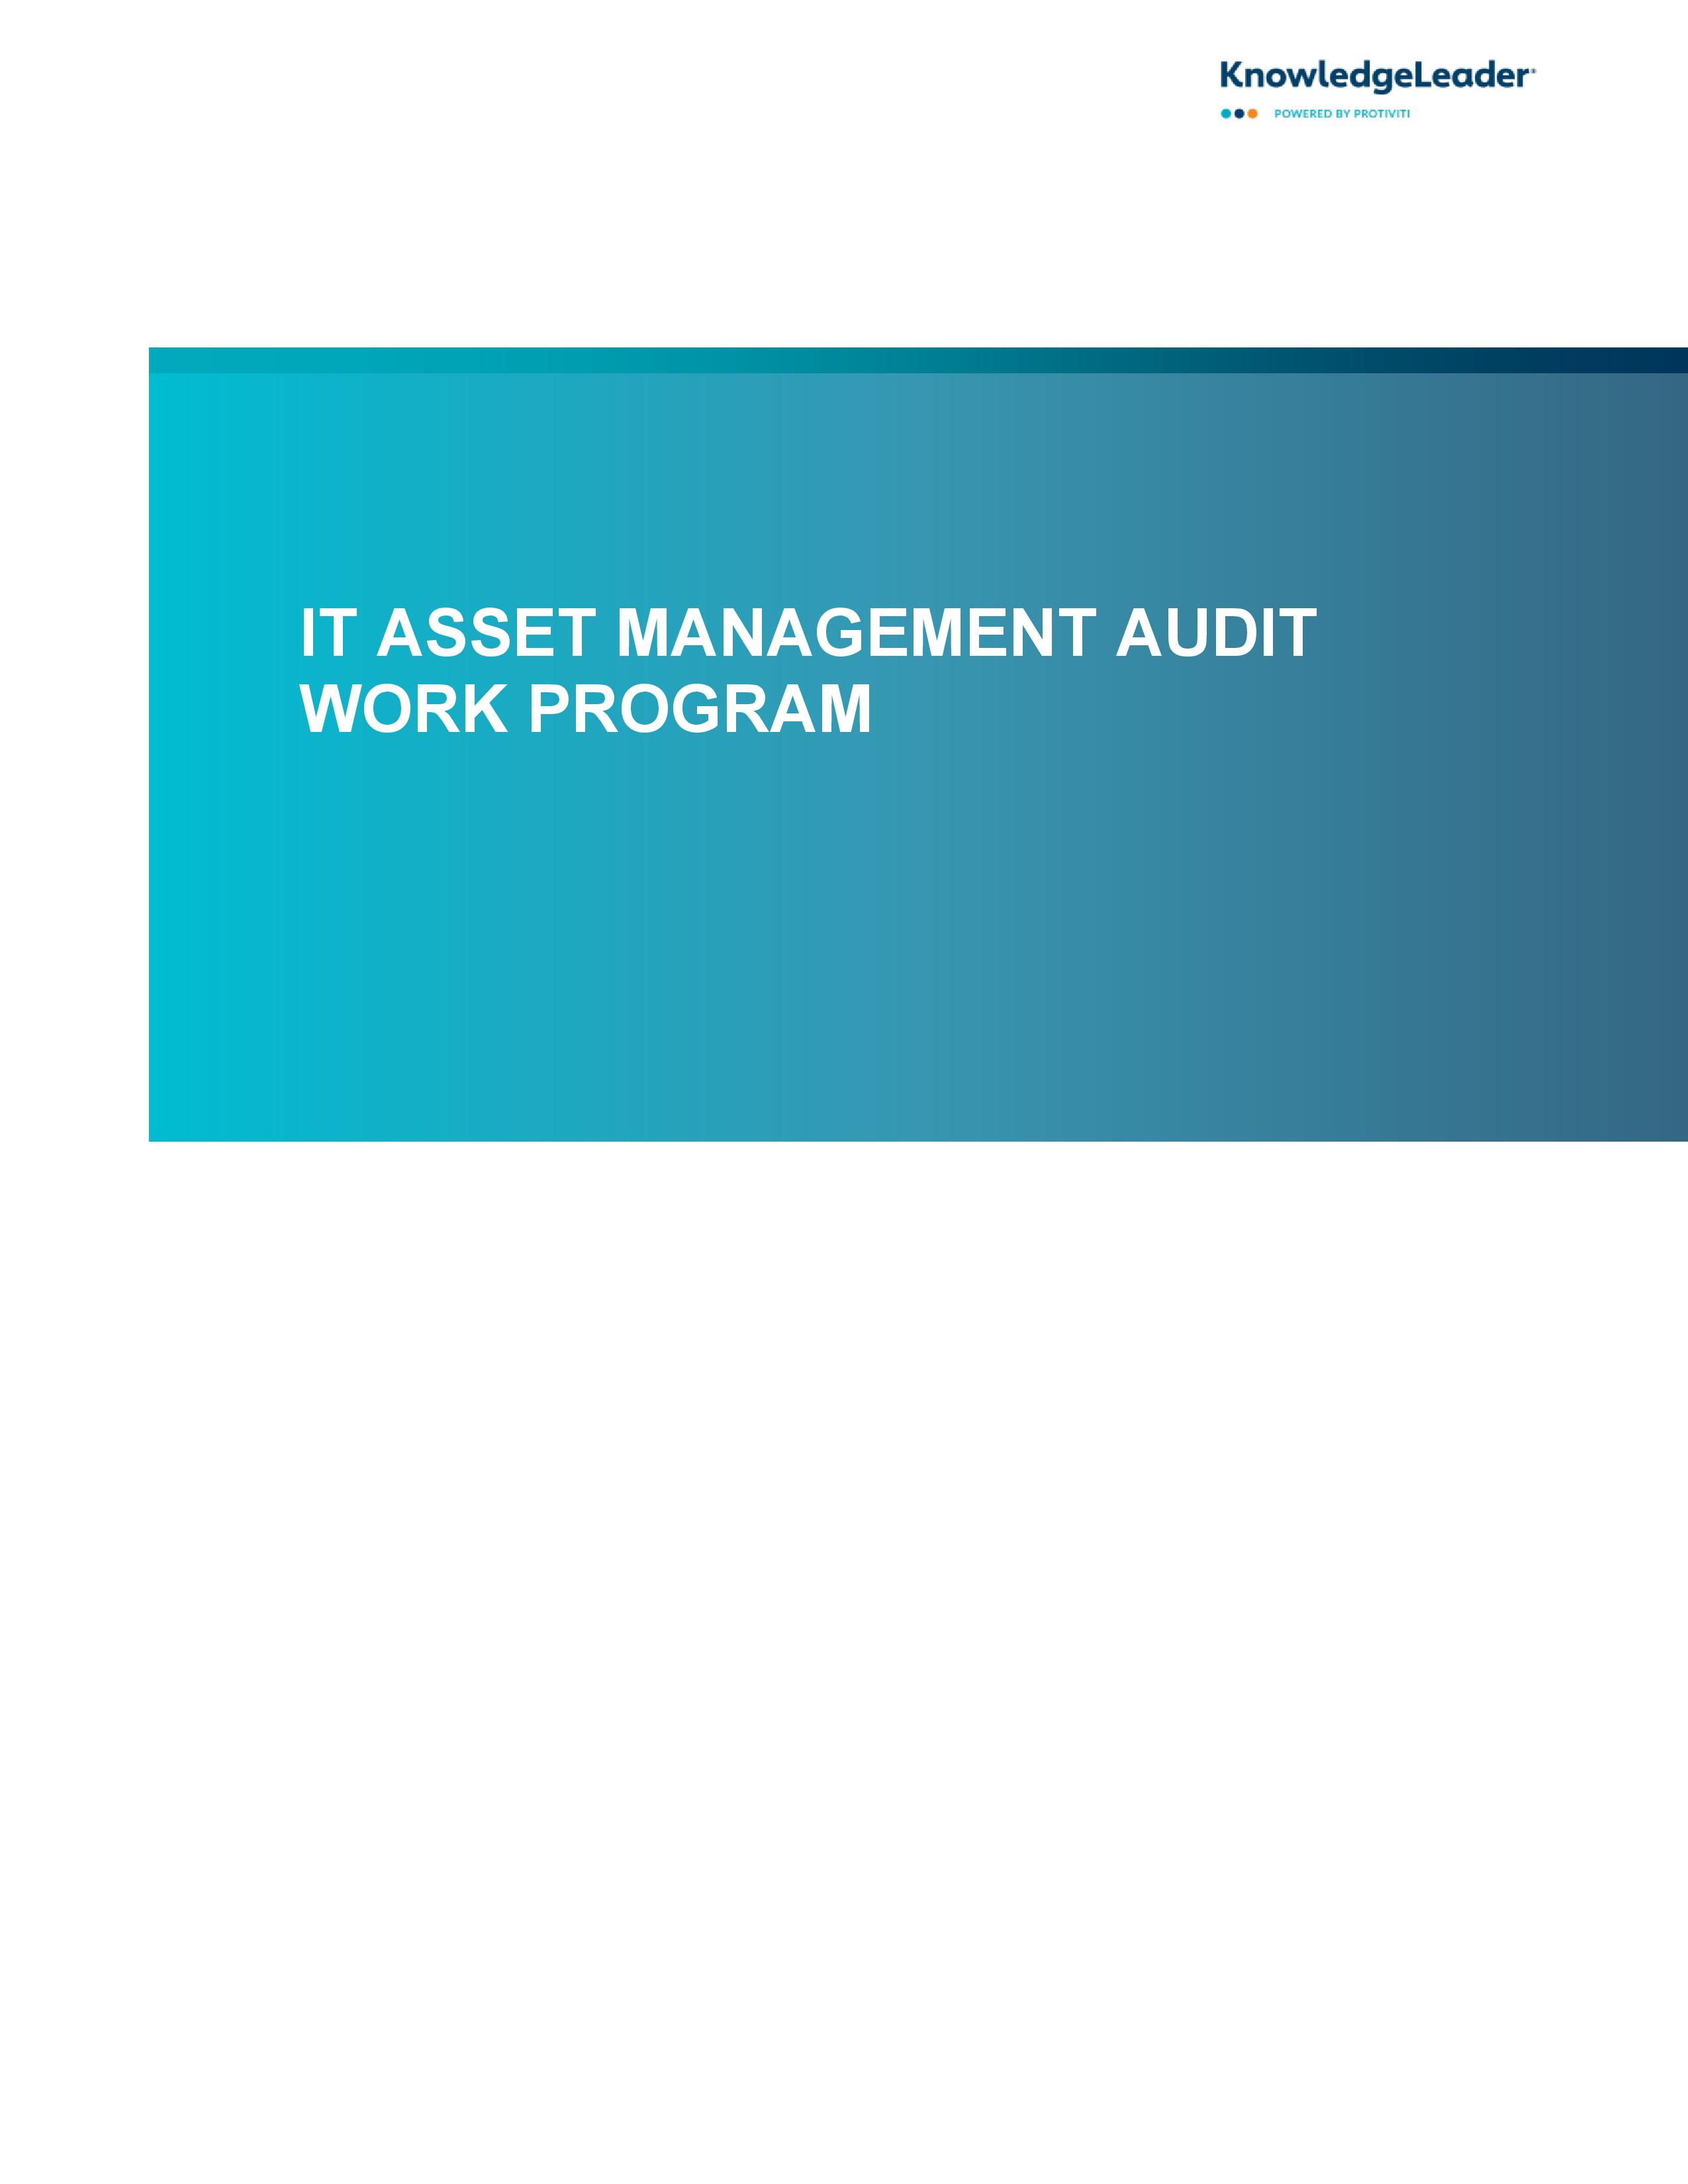 Screenshot of the first page of IT Asset Management Audit Work Program